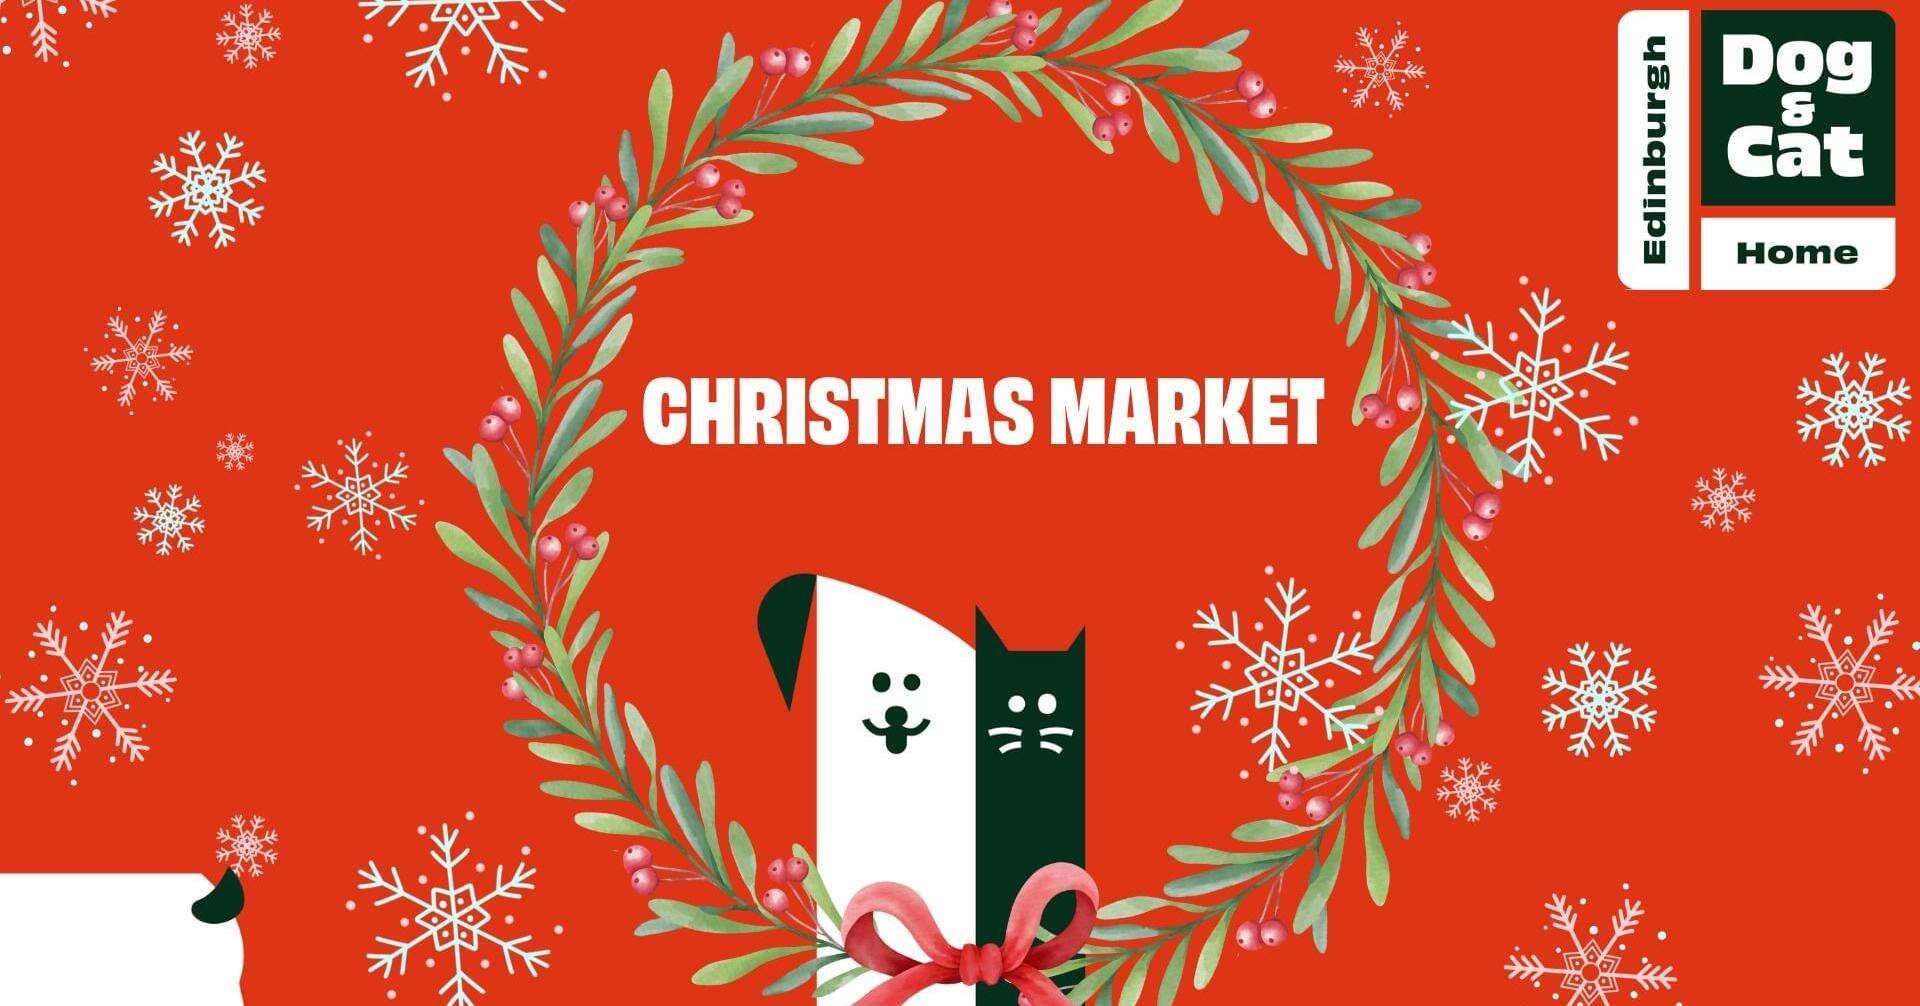 It&rsquo;s a busy weekend ahead for us!  On Sunday, 4th December, we&rsquo;ll be at The Biscuit Factory in Edinburgh, for the Edinburgh Dog &amp; Cat Home&rsquo;s Christmas Market 🎄🐶🐱

The market will feature local artists and makers selling uniqu